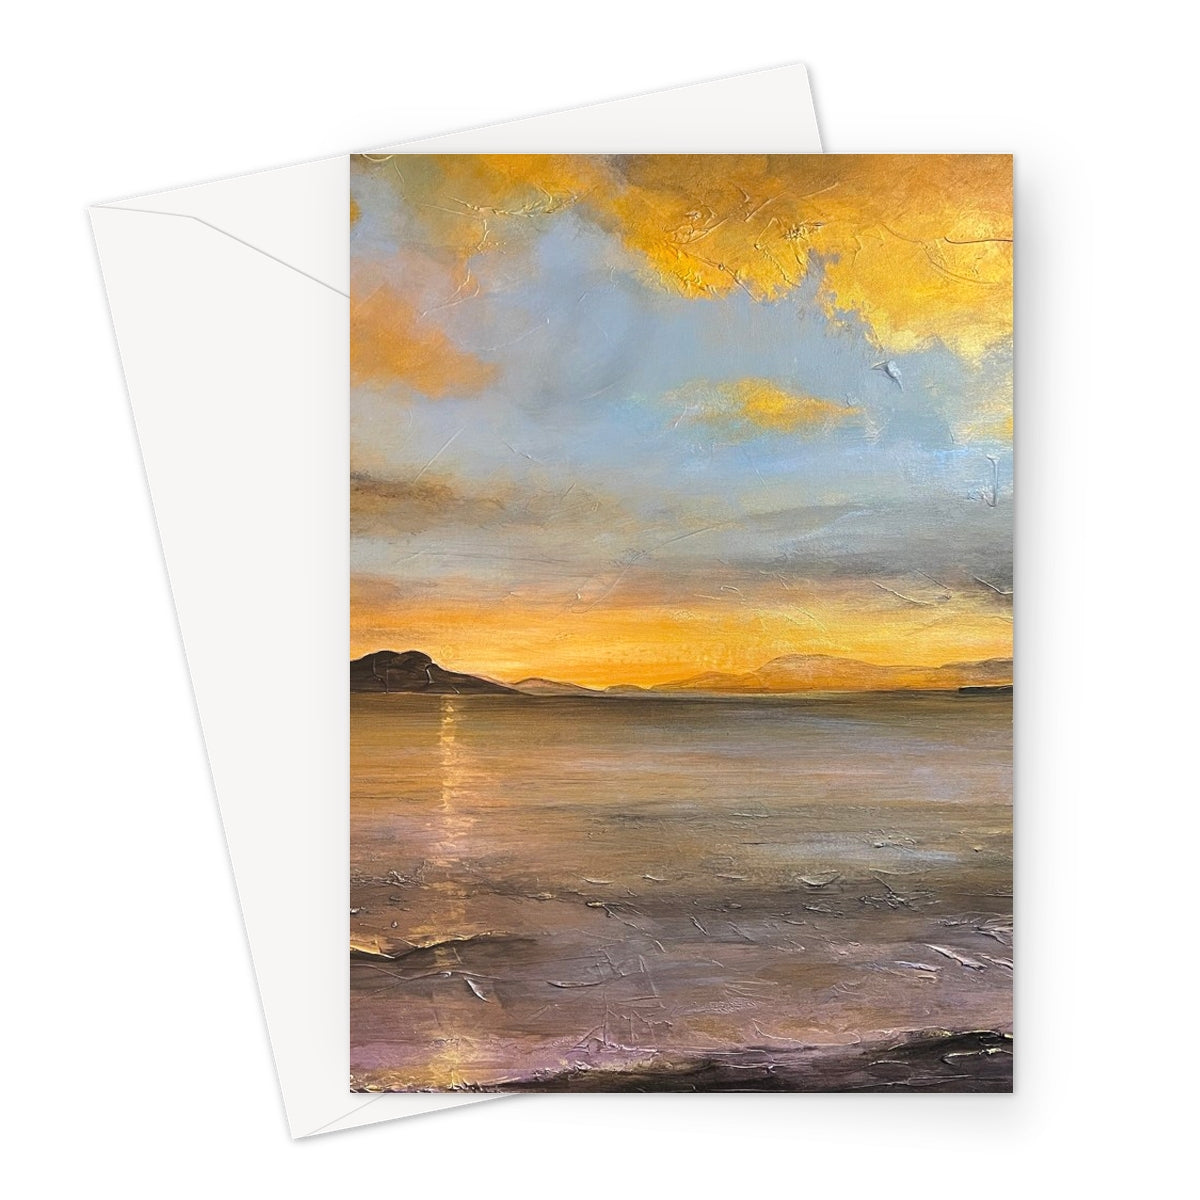 Loch Linnhe Sunset Art Gifts Greeting Card-Greetings Cards-Scottish Lochs & Mountains Art Gallery-A5 Portrait-1 Card-Paintings, Prints, Homeware, Art Gifts From Scotland By Scottish Artist Kevin Hunter